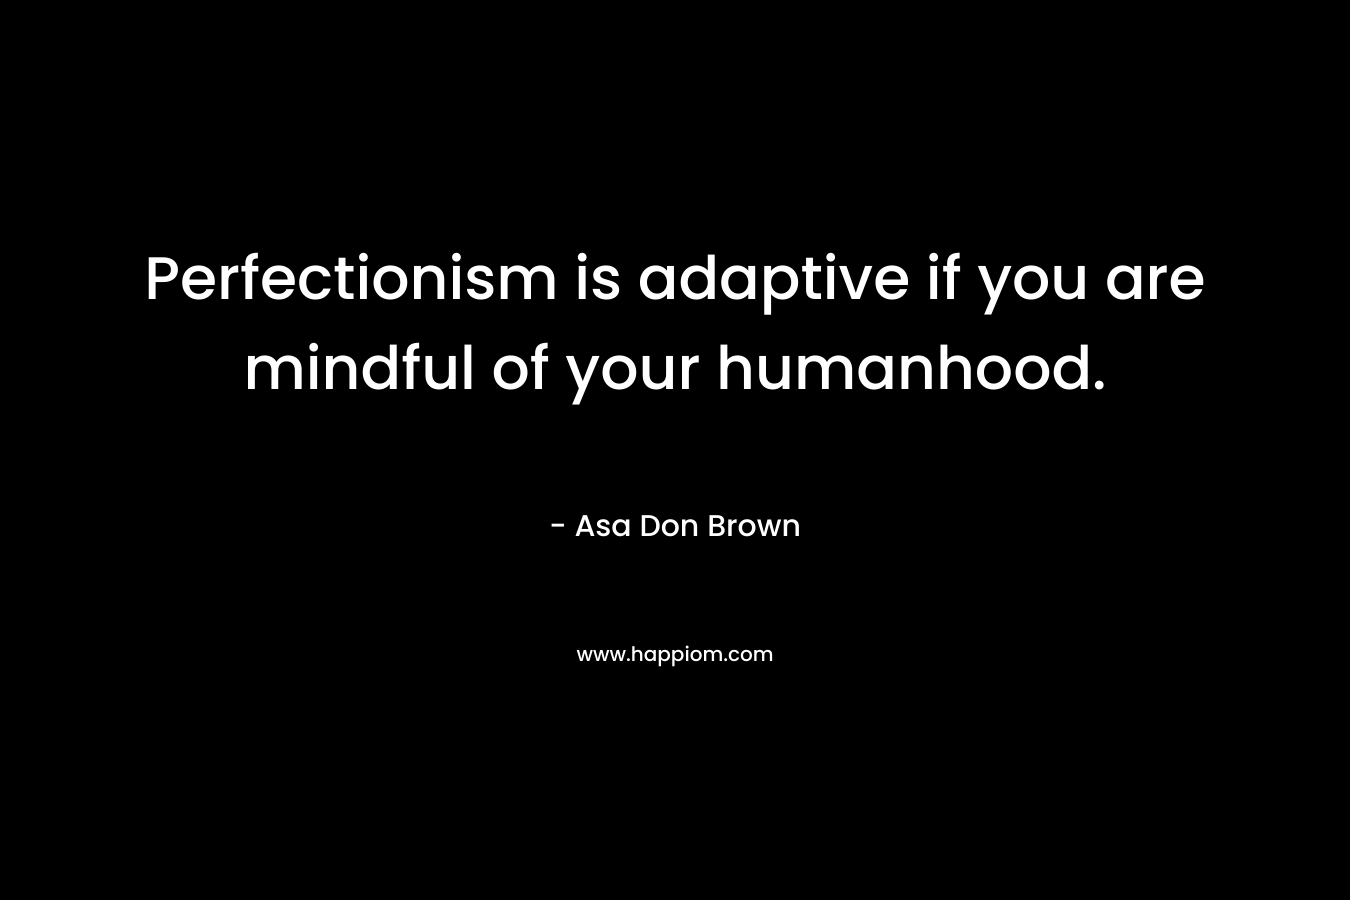 Perfectionism is adaptive if you are mindful of your humanhood.